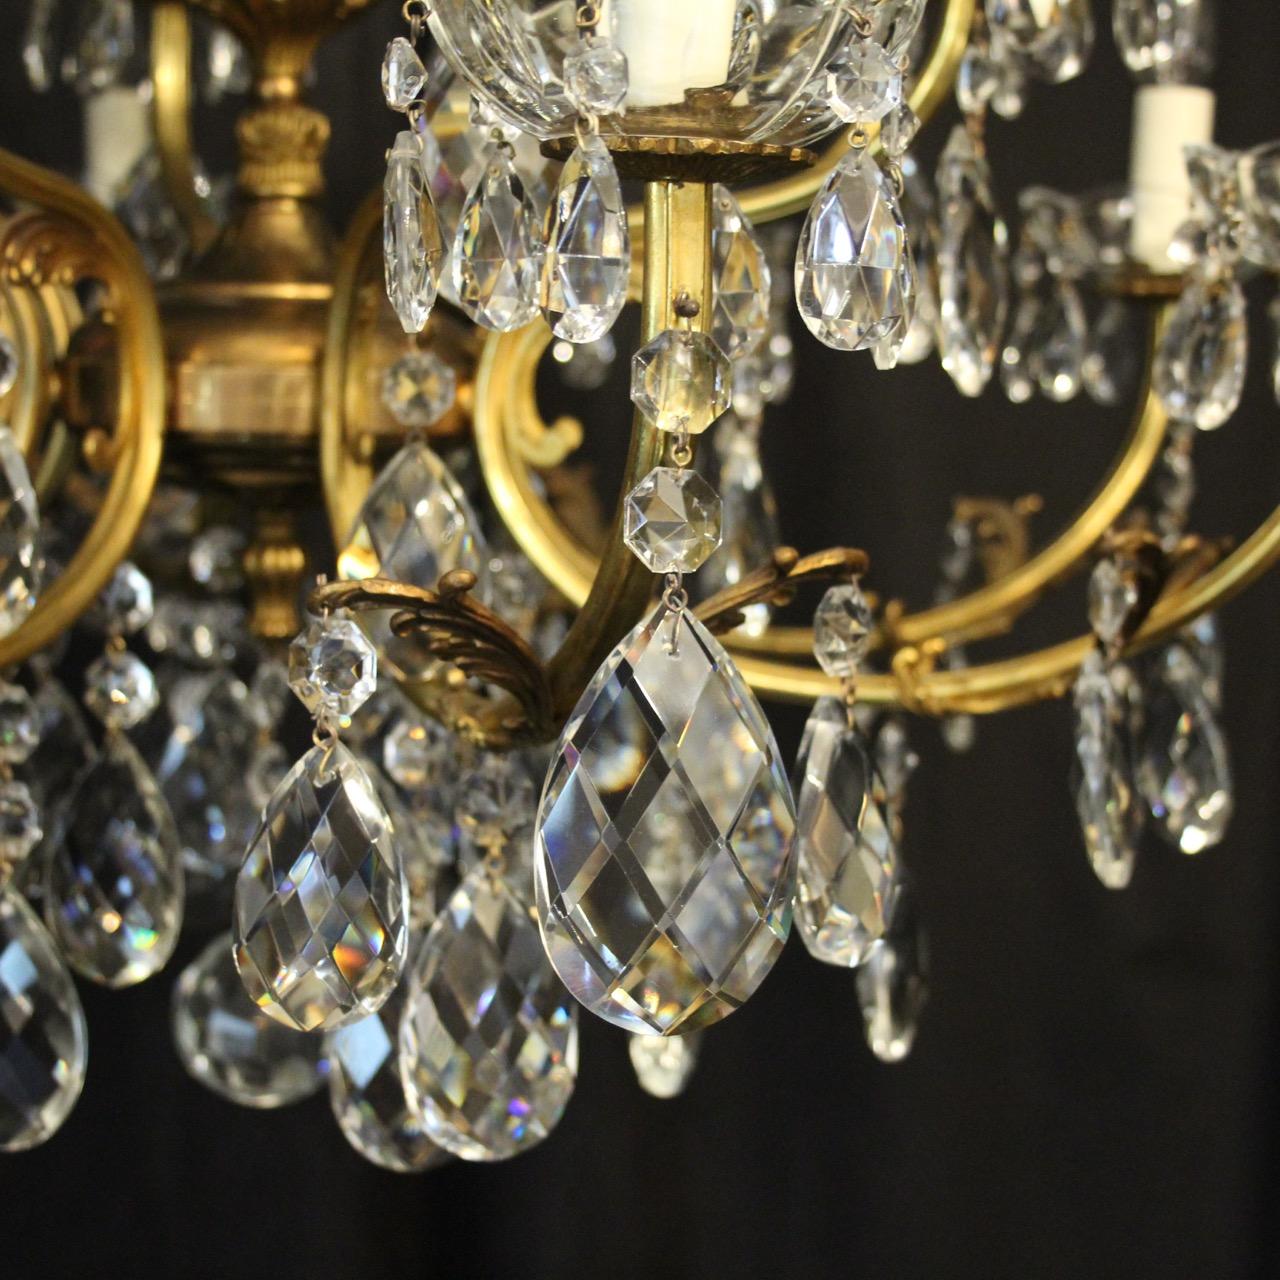 Italian Gilded and Crystal 16-Light Antique Chandelier (Barock)